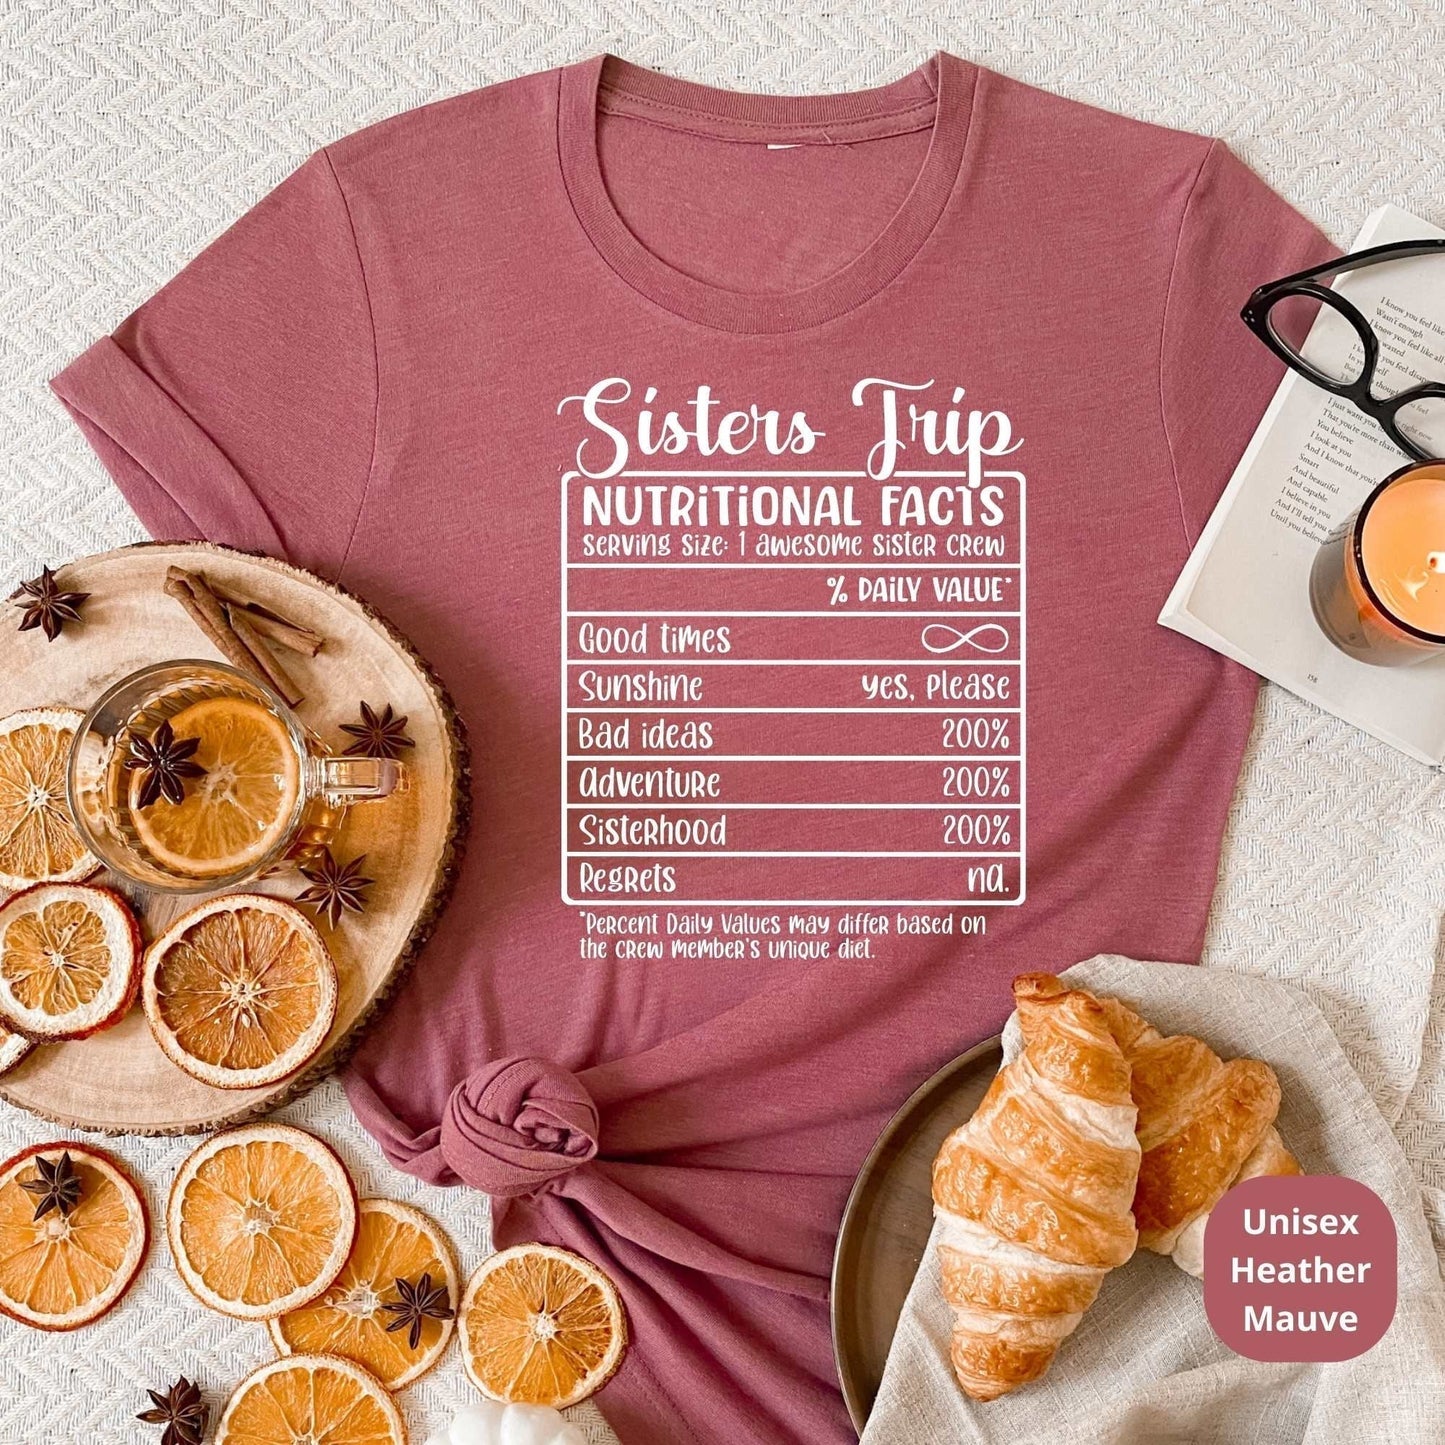 Girls Trip Shirts, Sisters Vacation, Best Friends Gifts, Matching Group Vacation Tees, Mother Daughter Trip, BFF Vacay, Besties Weekend HMDesignStudioUS